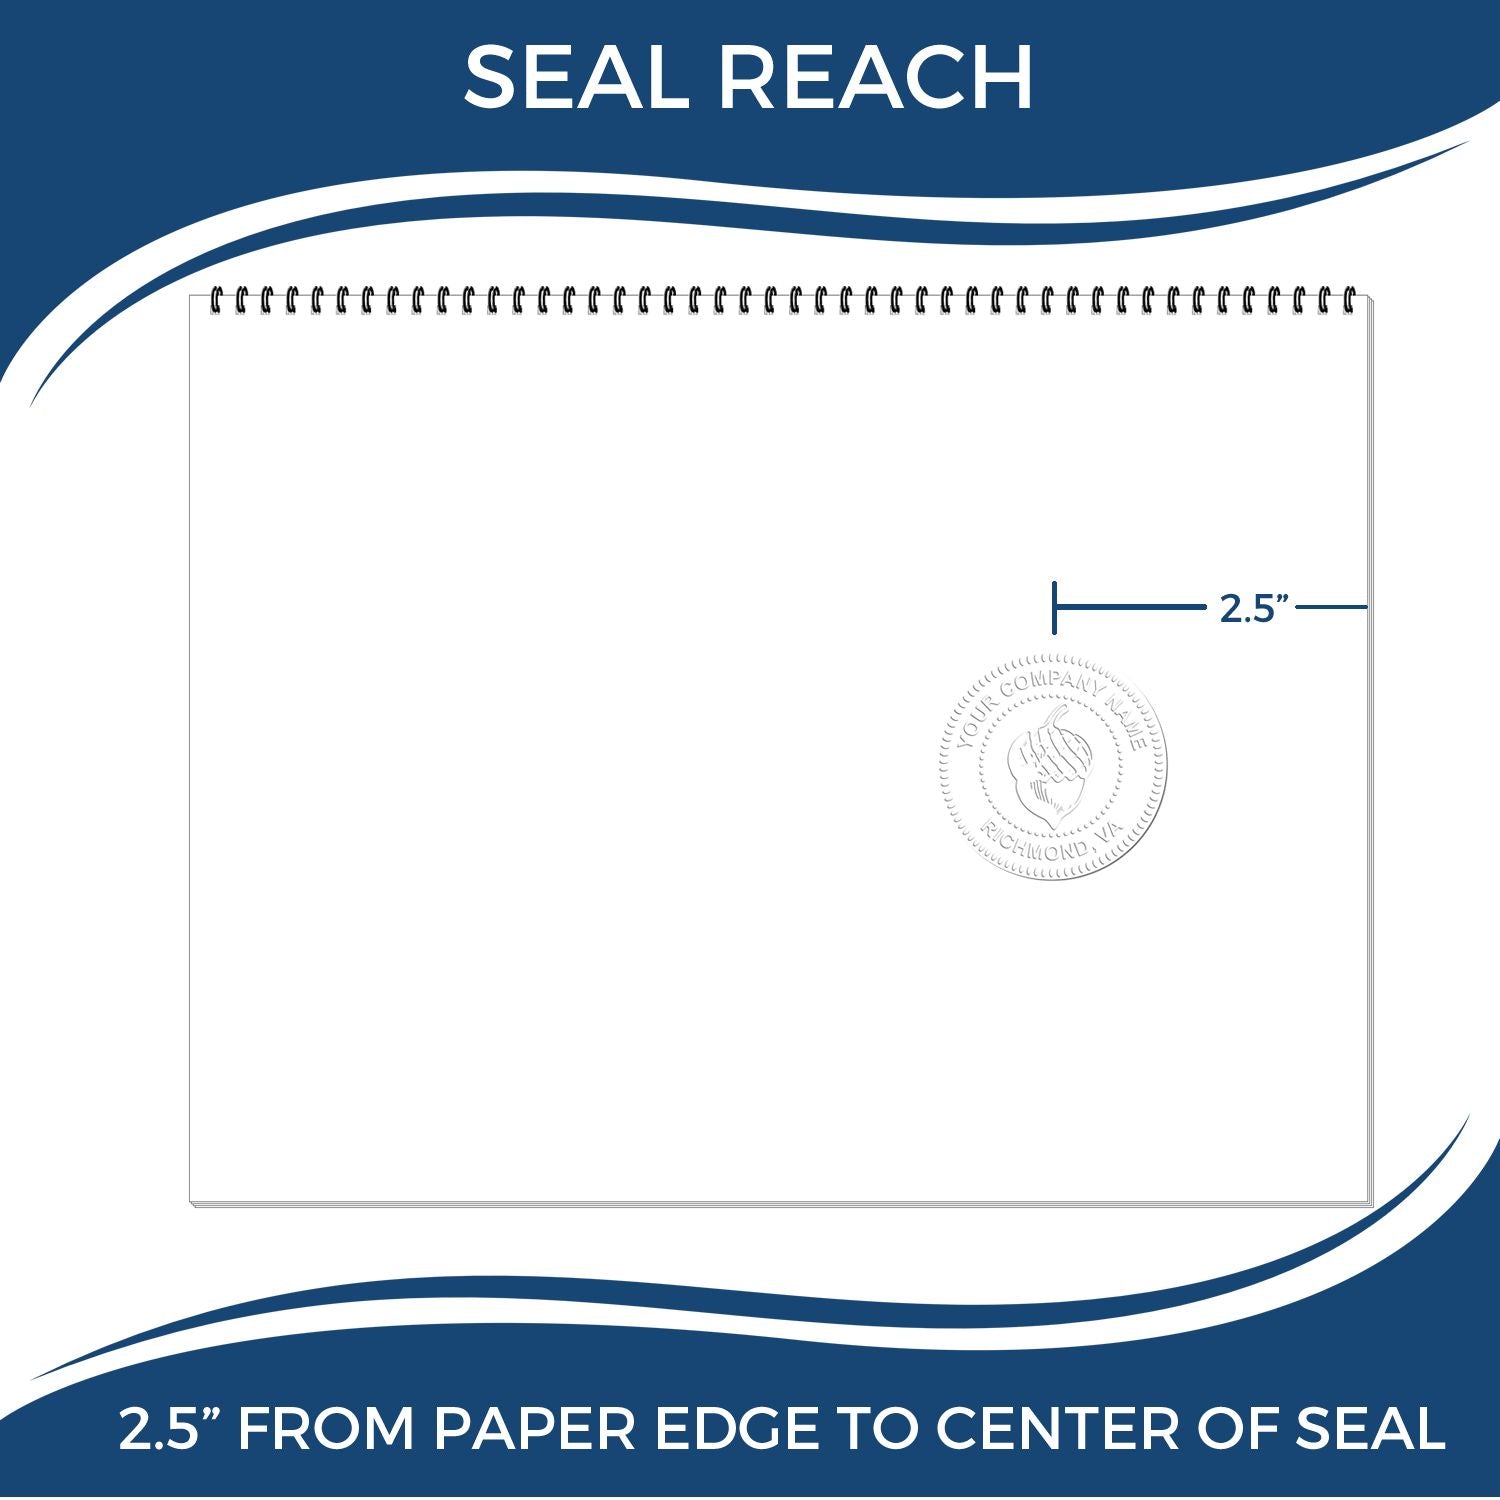 An infographic showing the seal reach which is represented by a ruler and a miniature seal image of the Heavy Duty Connecticut Landscape Architect Cast Iron Embosser